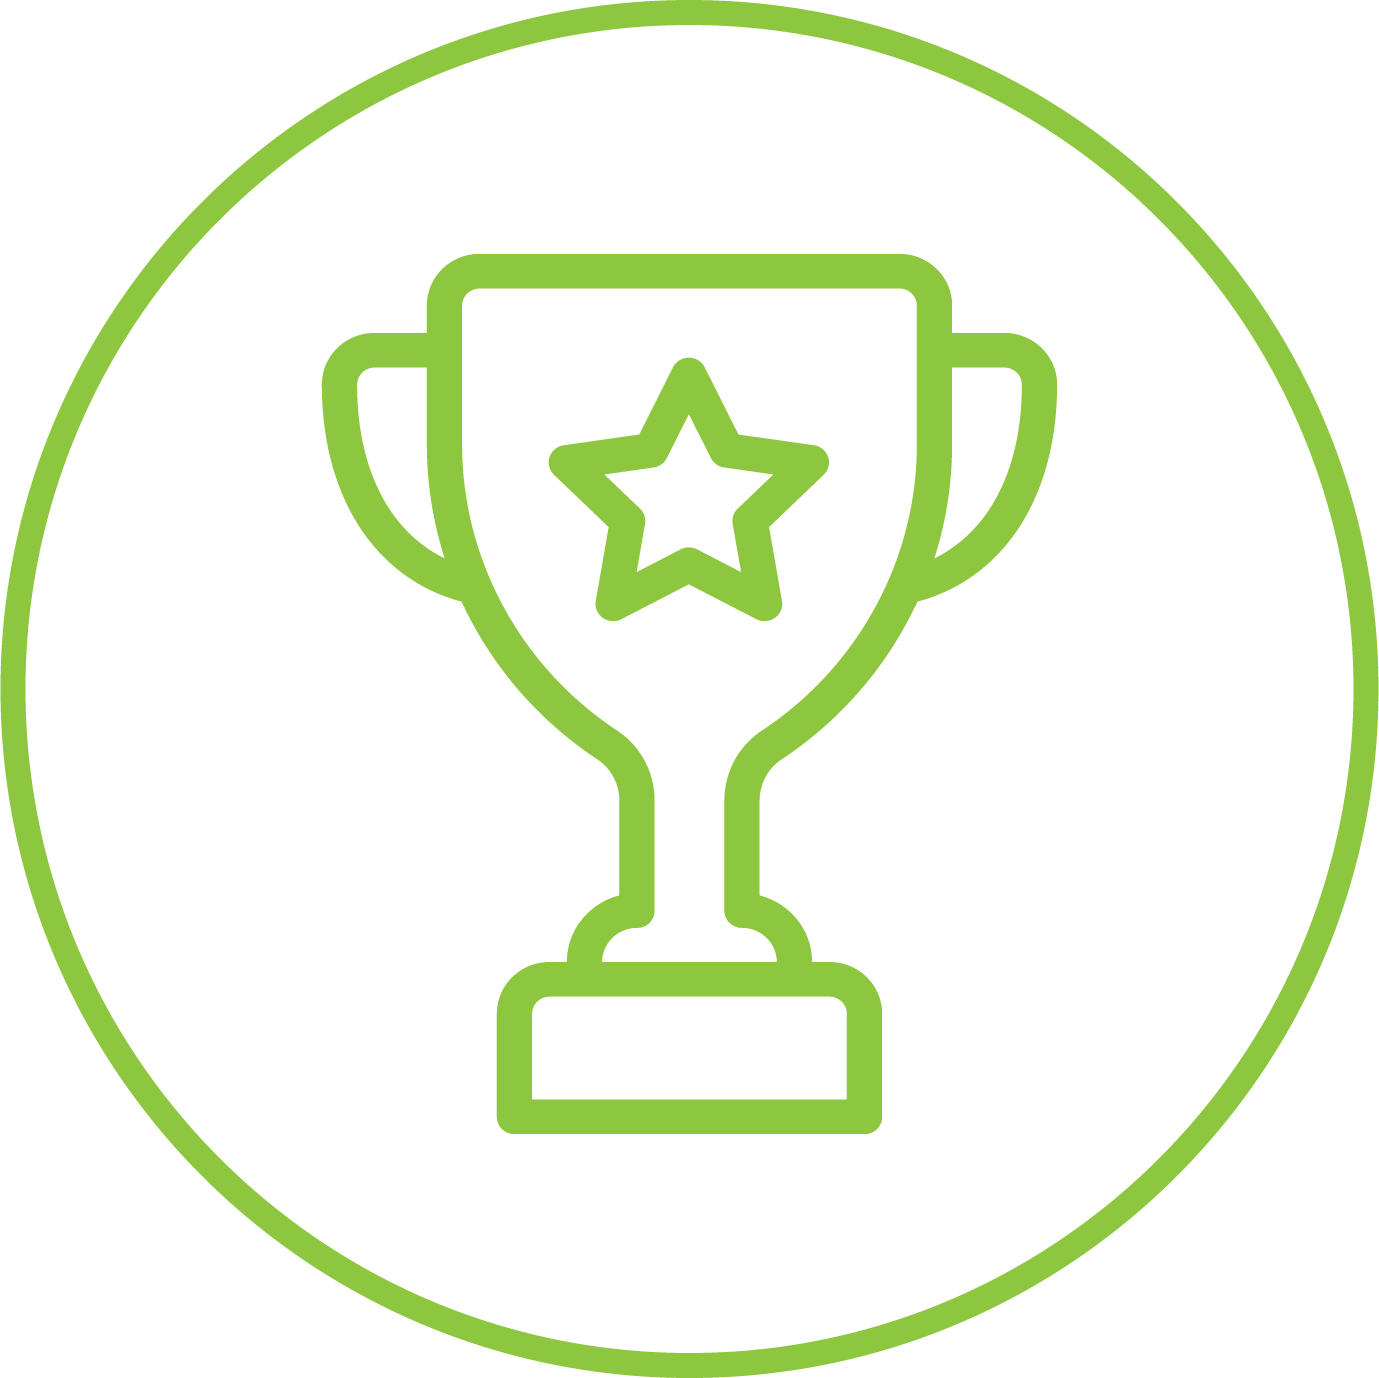 Green trophy icon